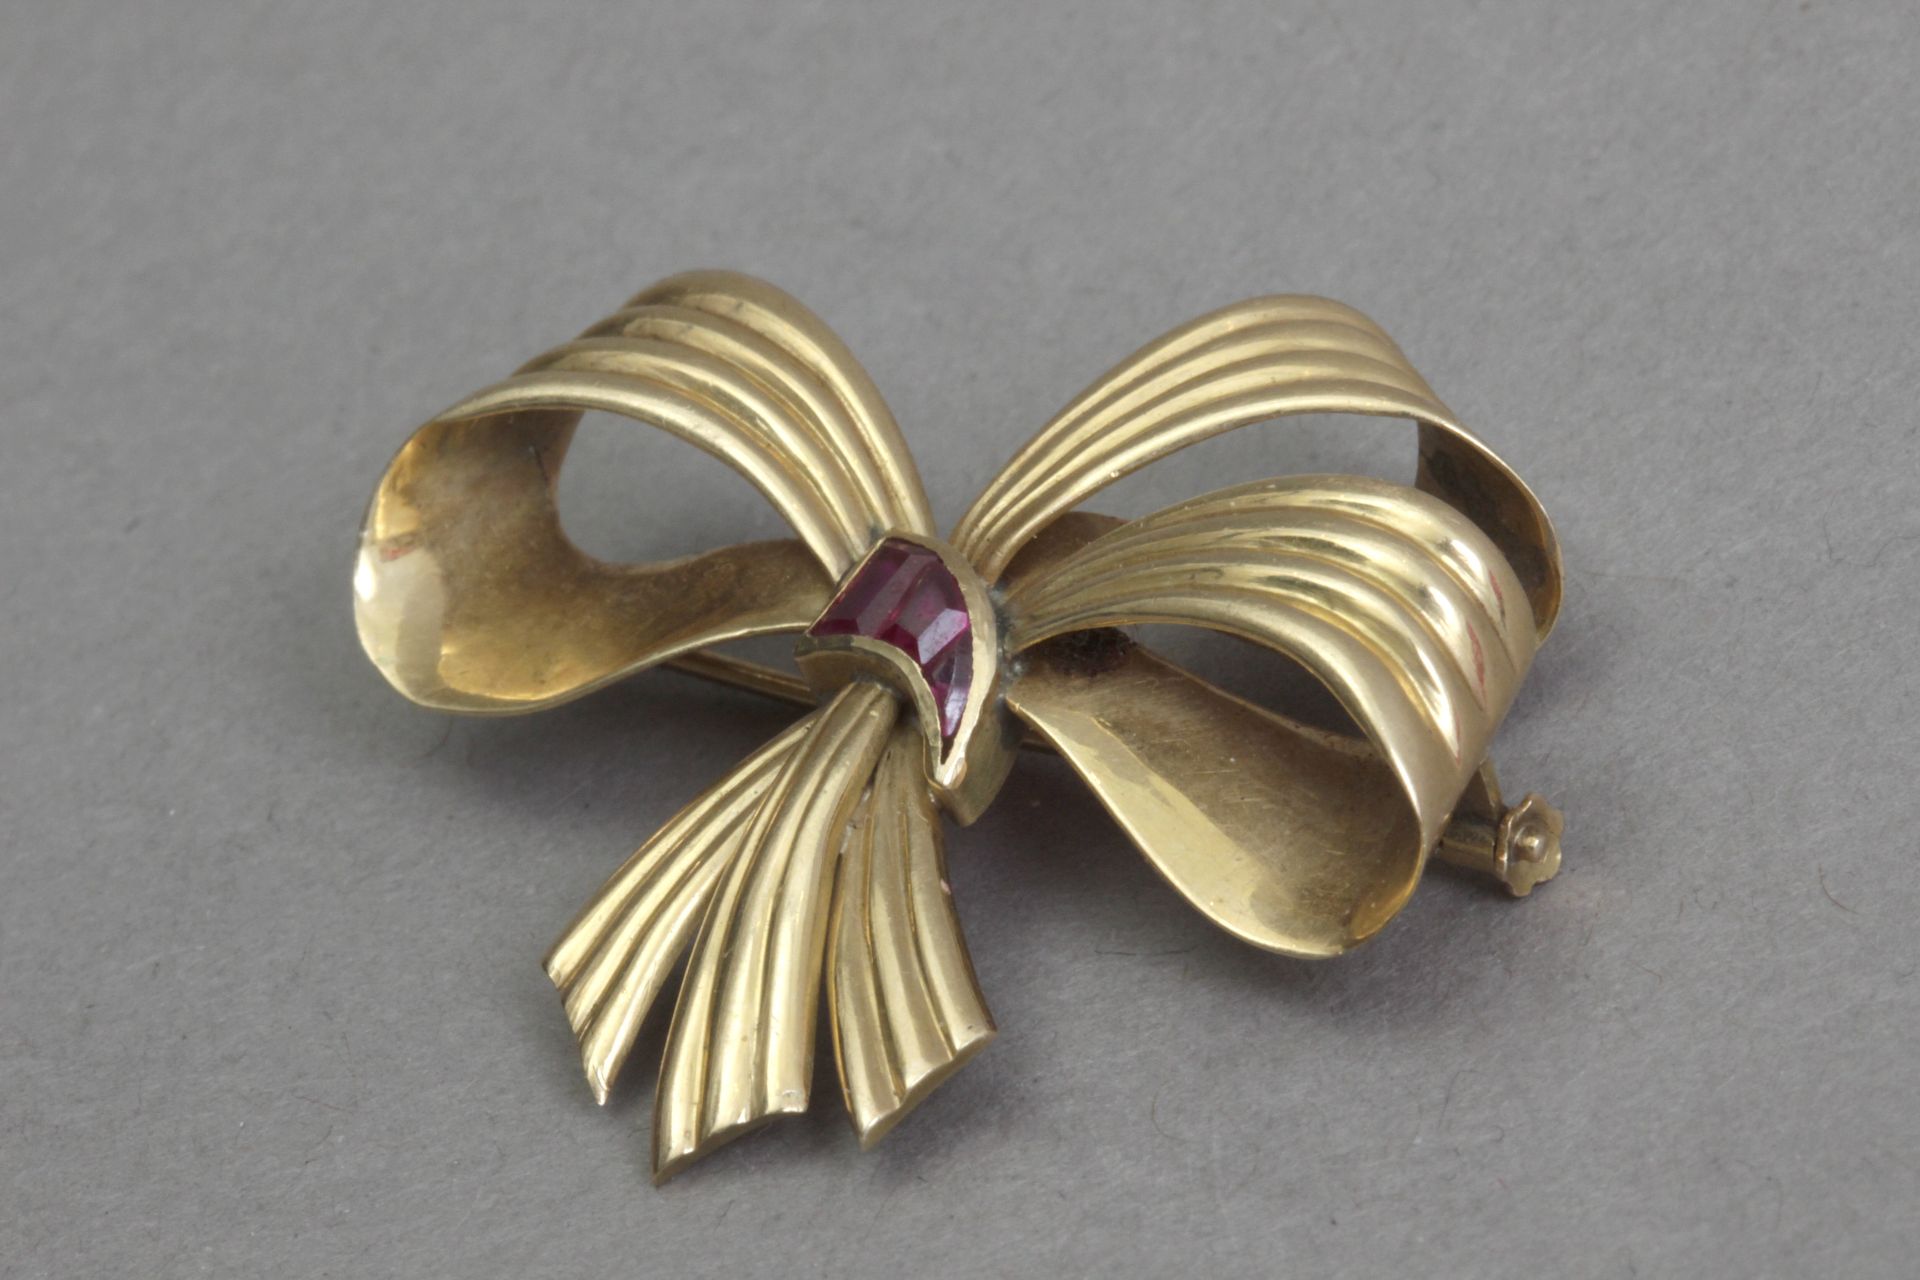 A first half of 20th century rubis and 18k. yellow gold brooch